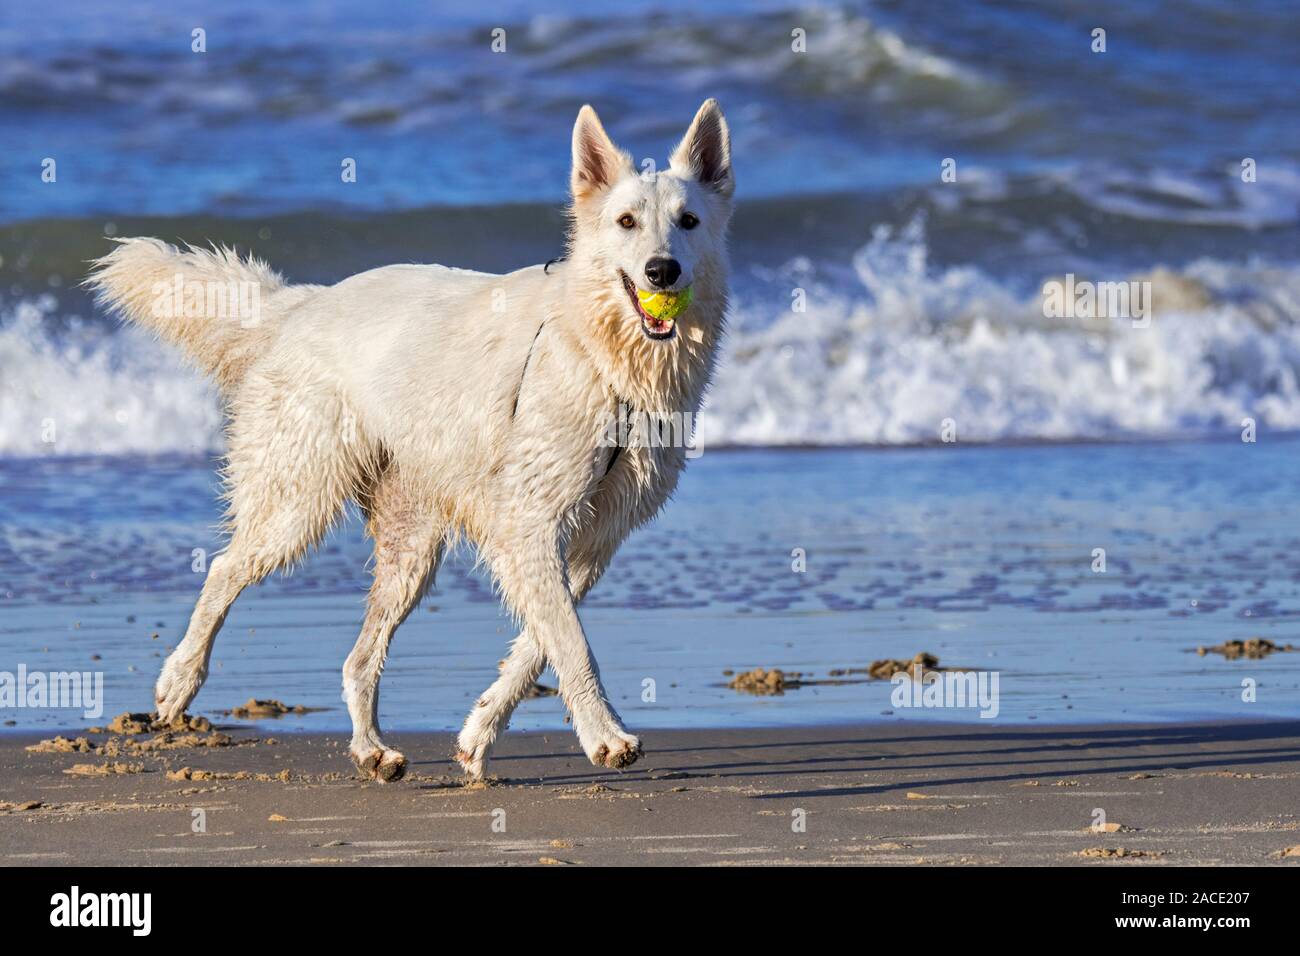 Unleashed Berger Blanc Suisse / White Swiss Shepherd, white form of German Shepherd dog running with tennis ball in mouth on the beach Stock Photo